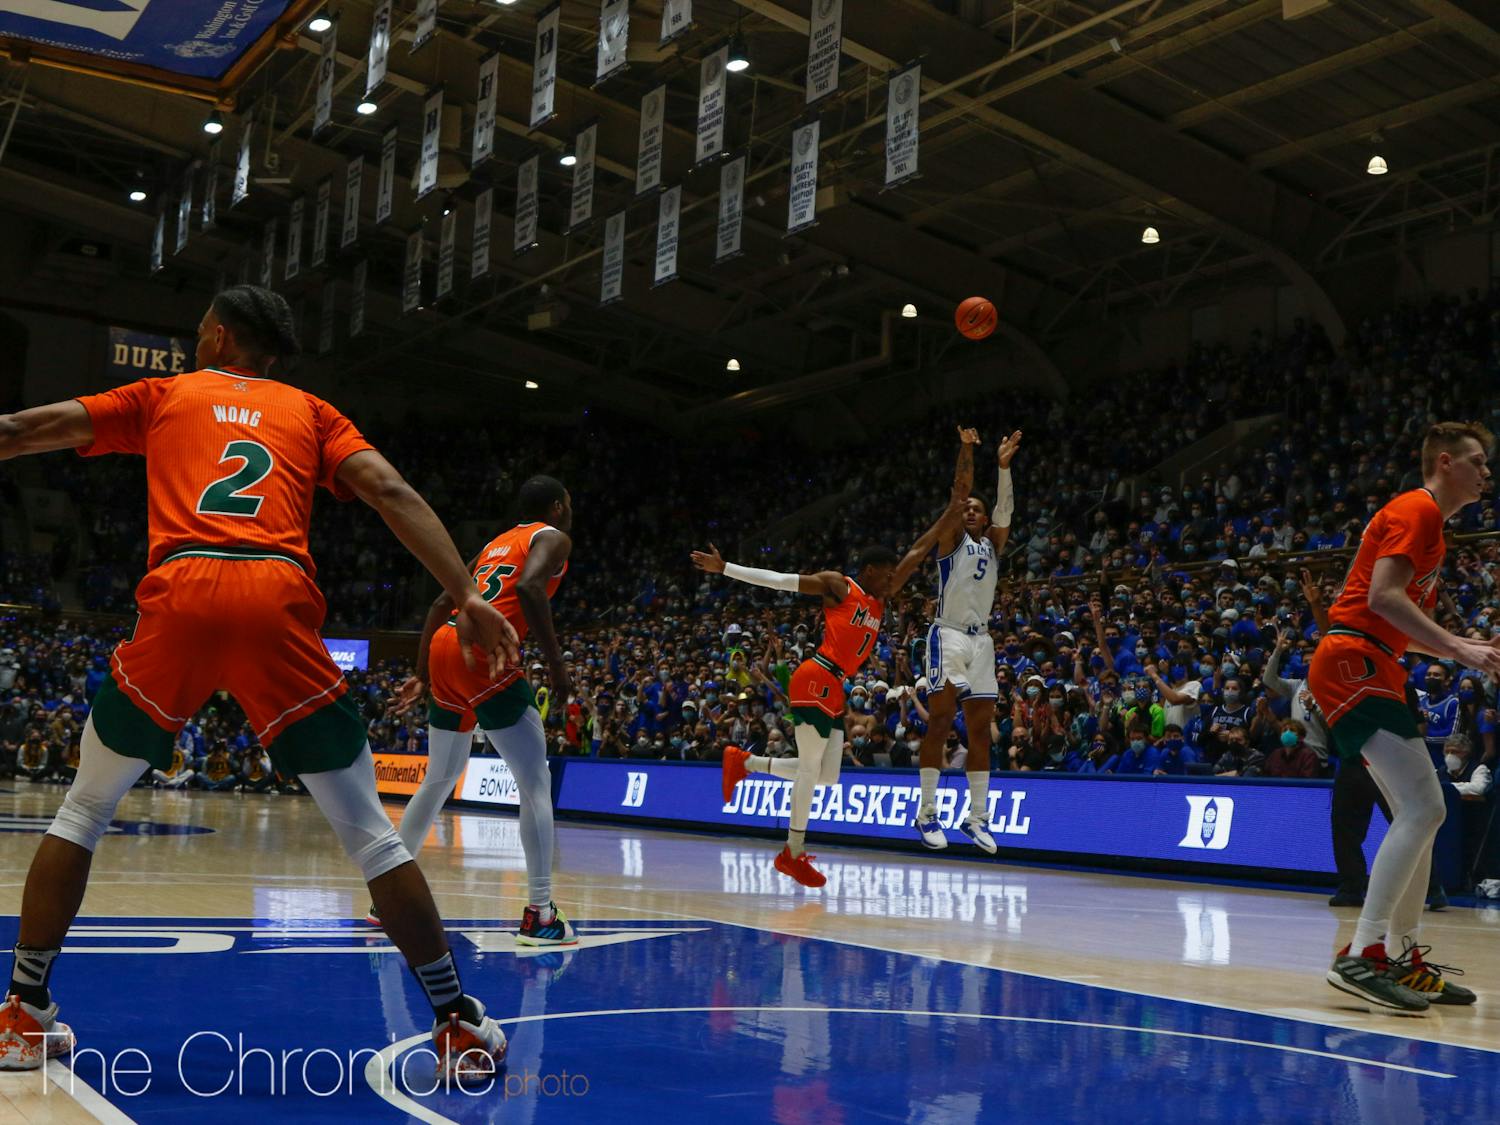 Paolo Banchero led all scorers with 20 points in Duke's loss to Miami.